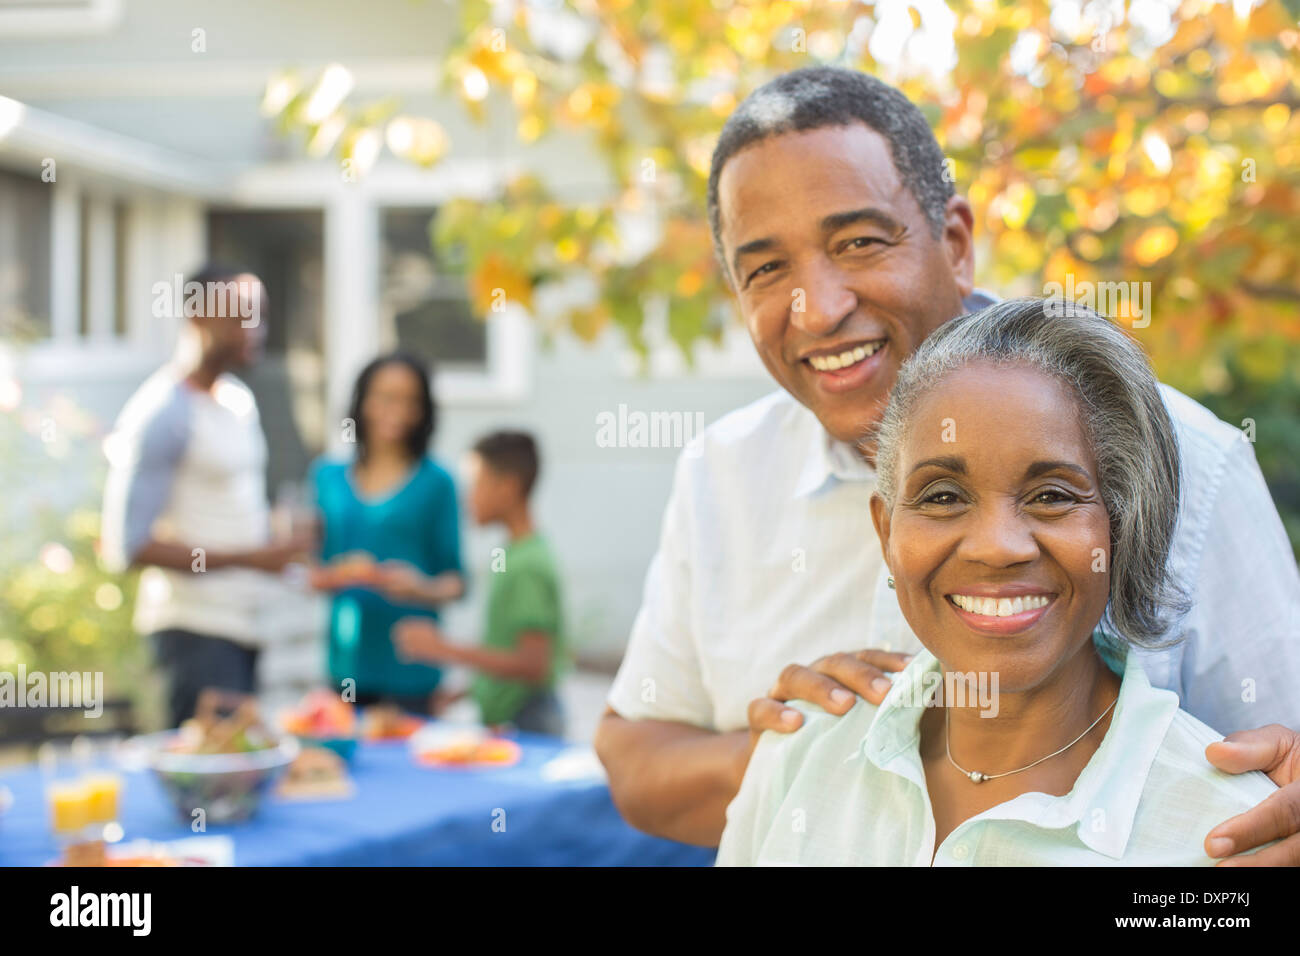 Portrait of smiling senior couple at barbecue Stock Photo